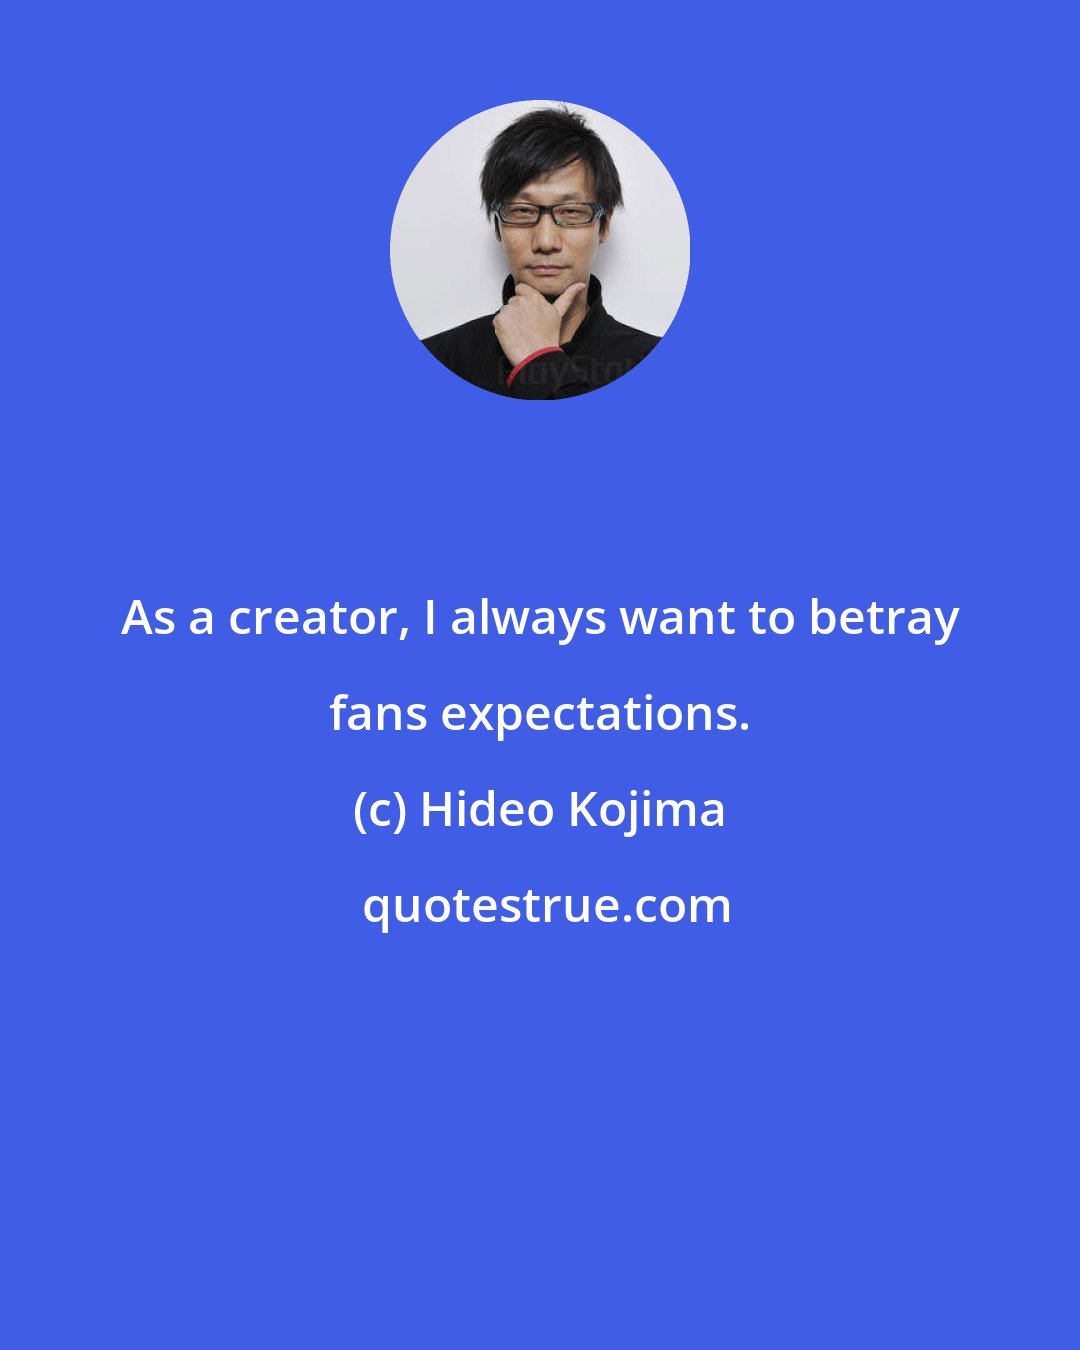 Hideo Kojima: As a creator, I always want to betray fans expectations.